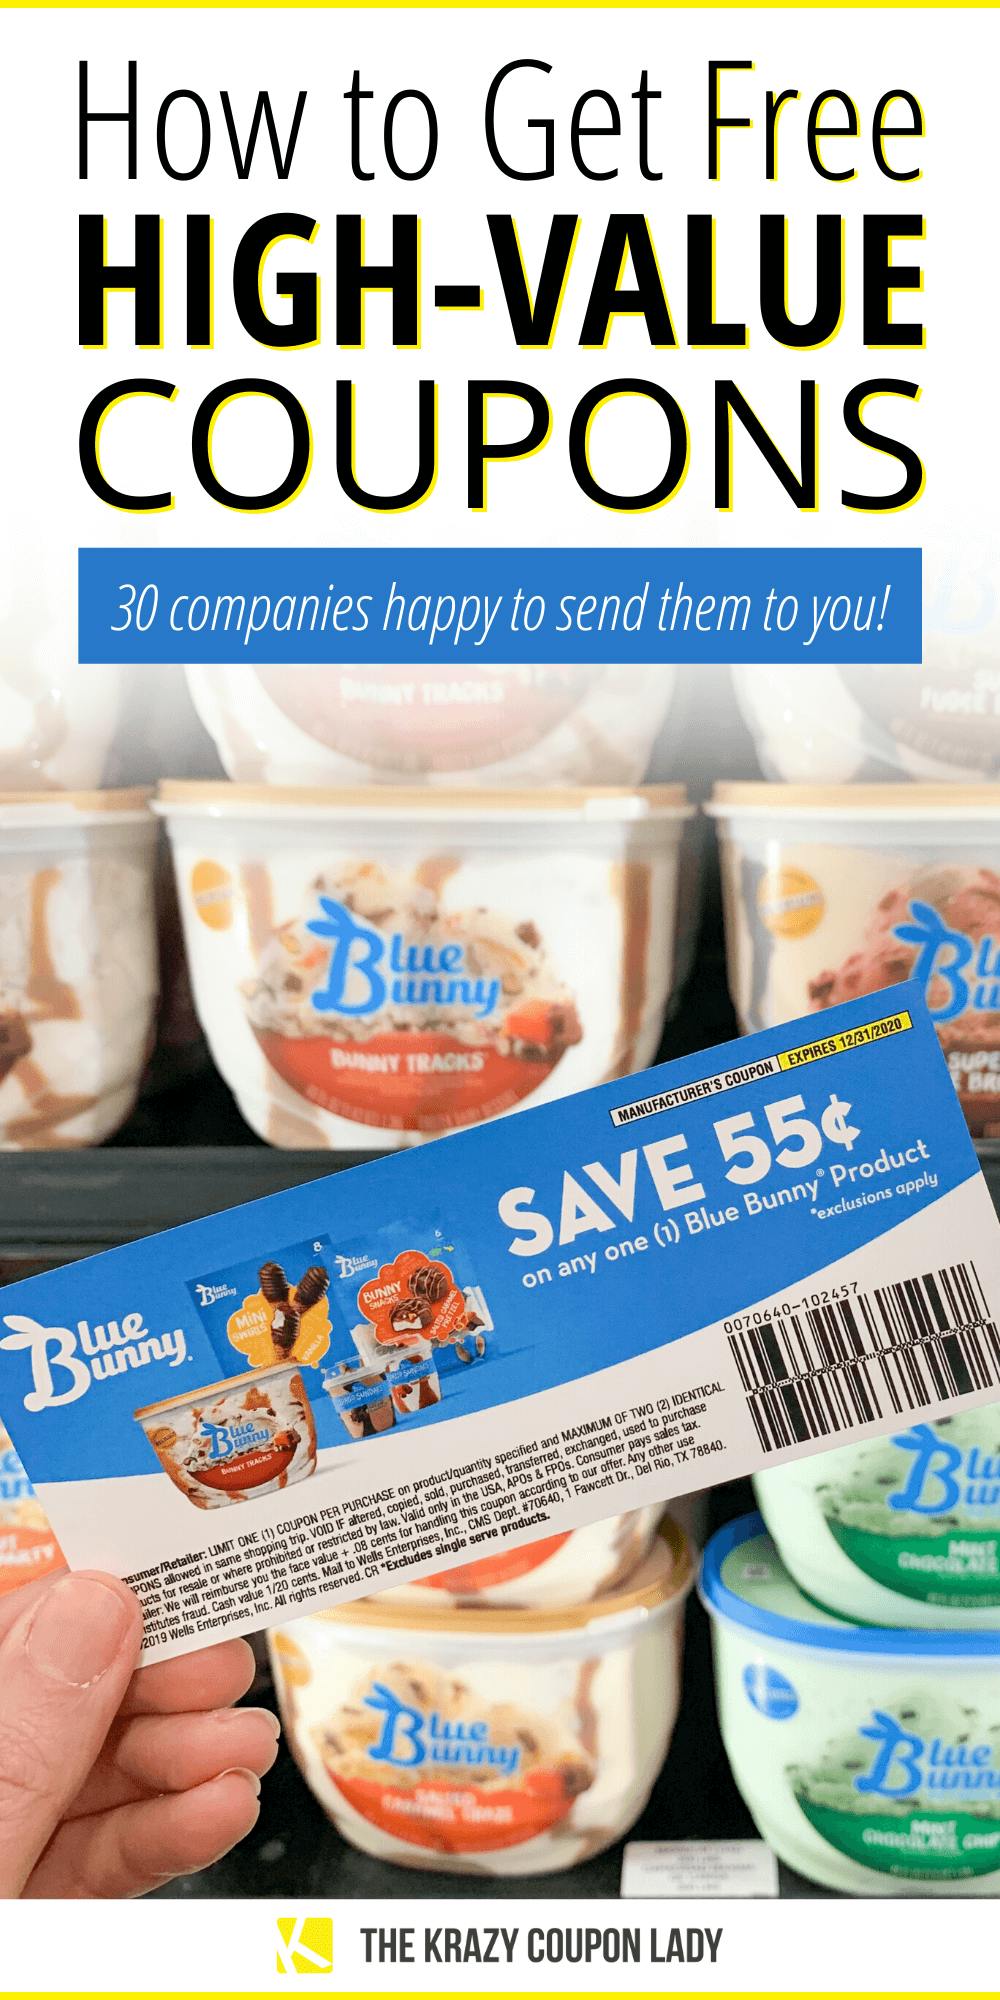 46 Companies That'll Send You Free High-Value Coupons (Just ask!)